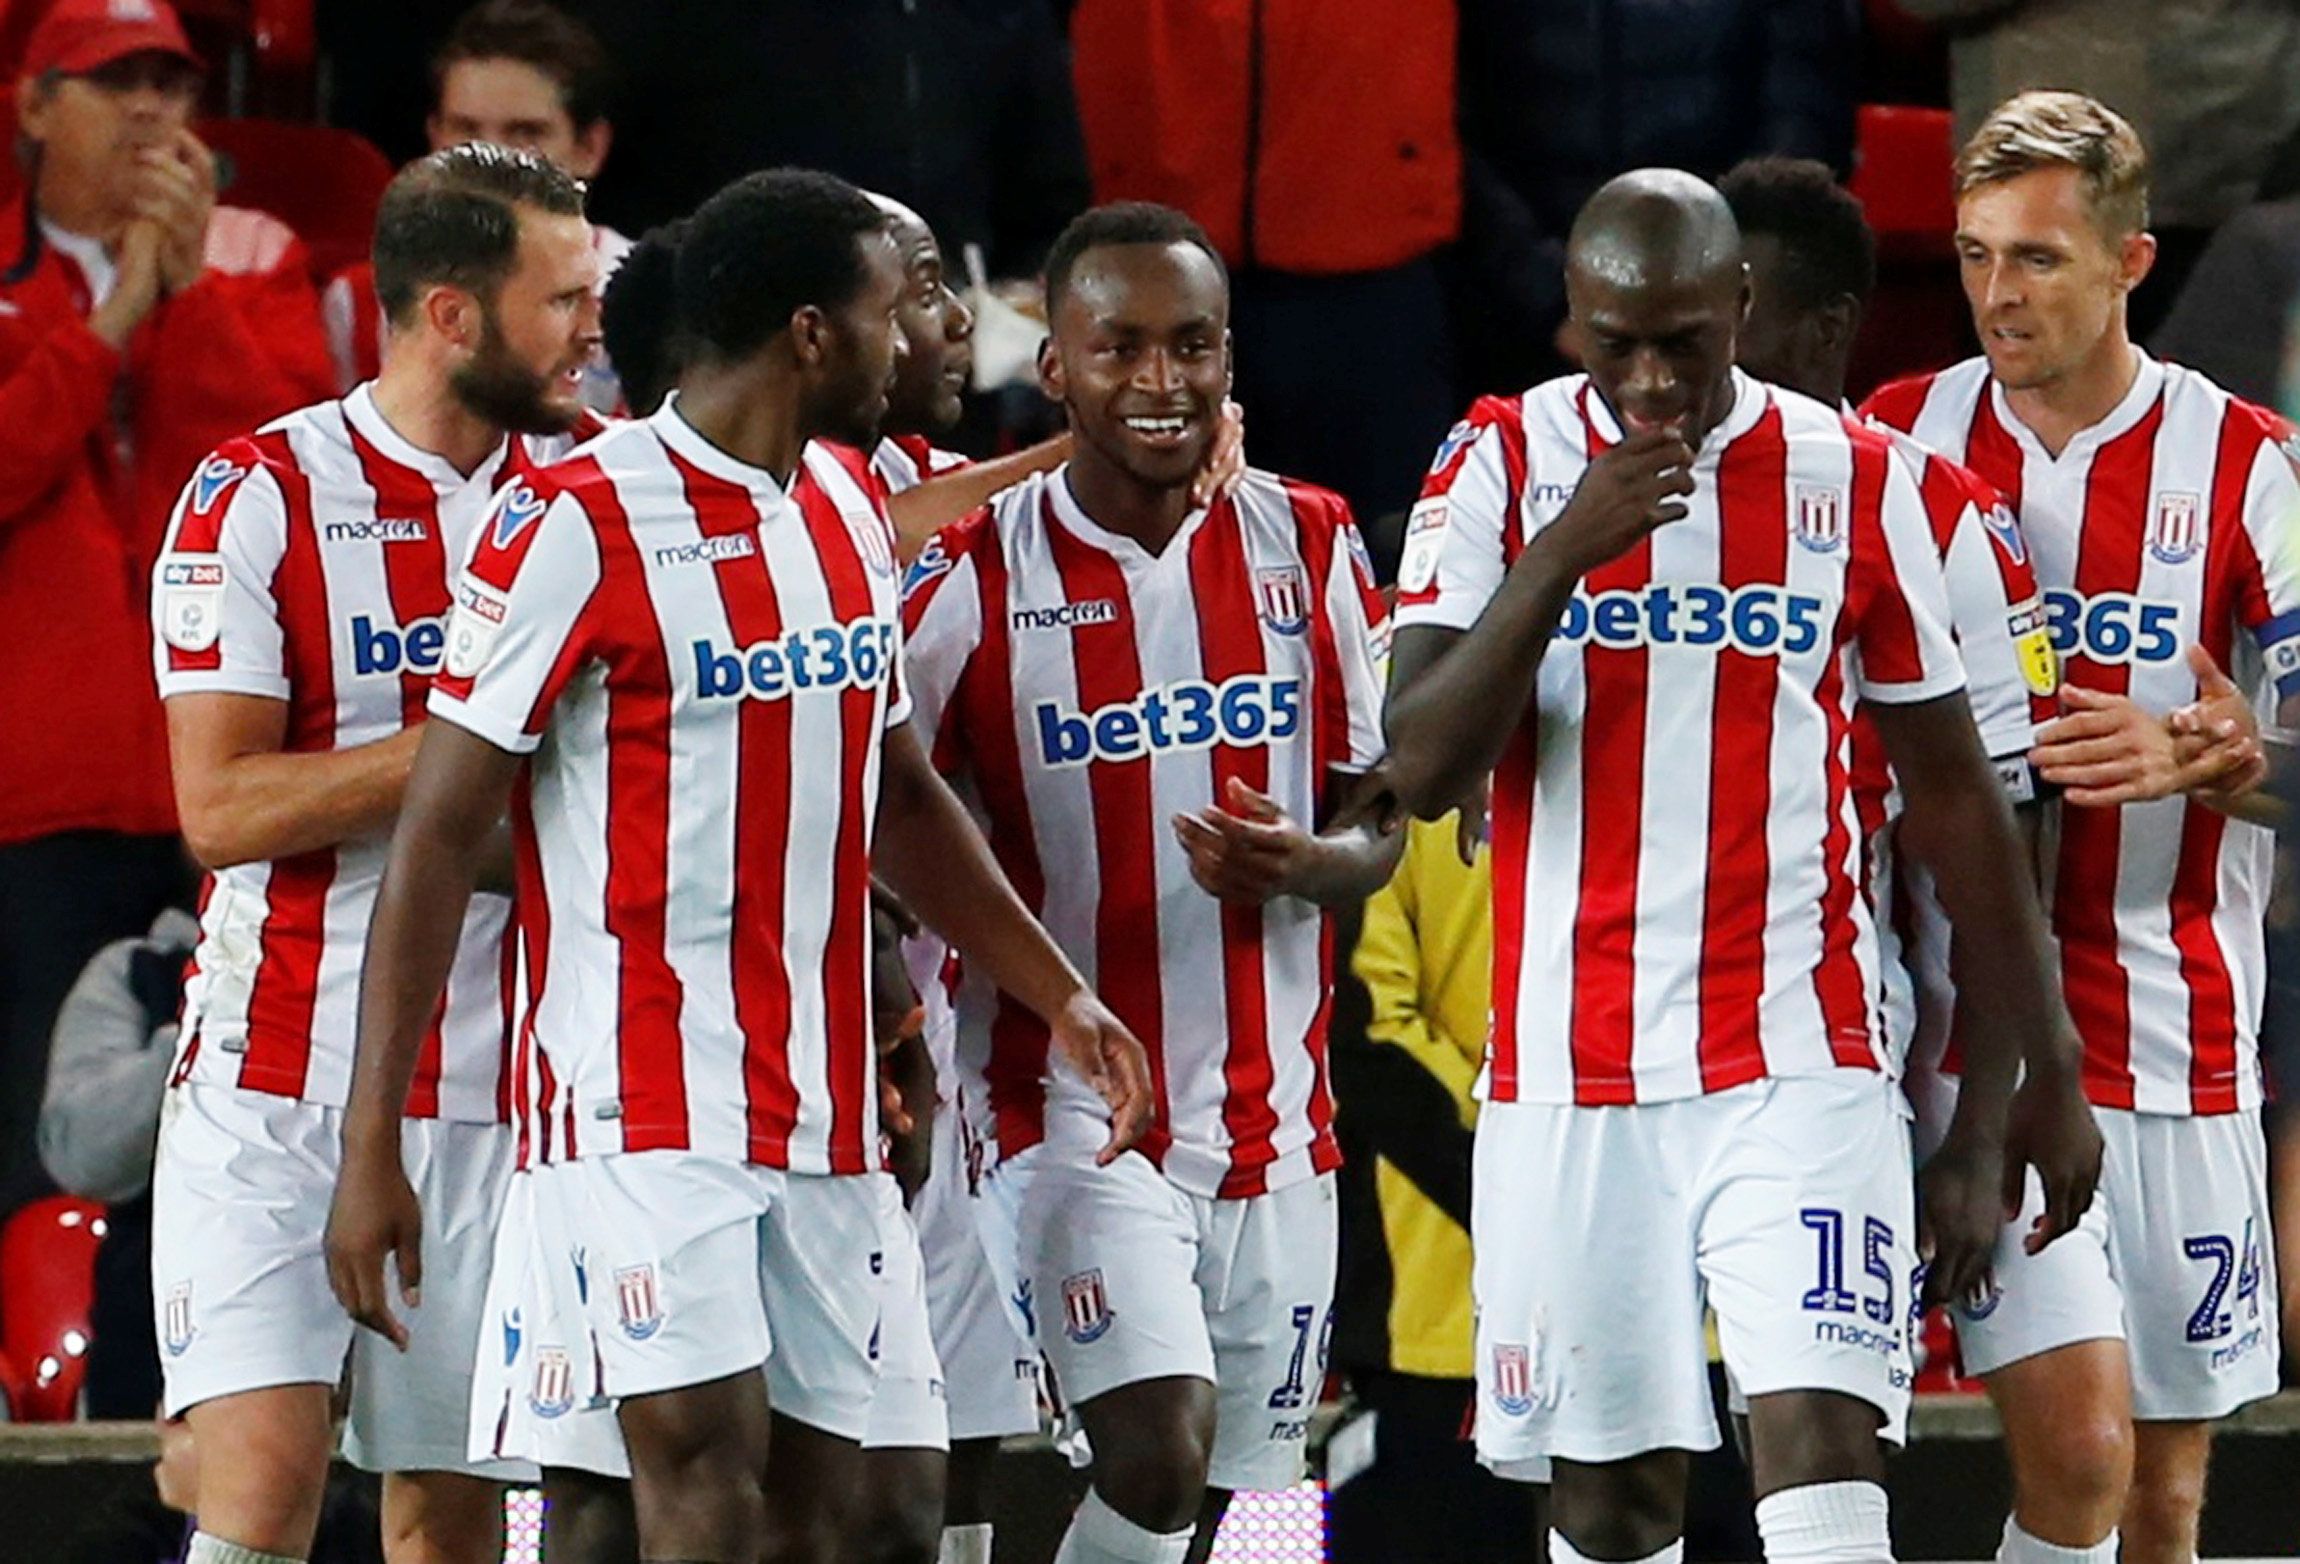 Soccer Football - Carabao Cup Second Round - Stoke City v Huddersfield Town - bet365 Stadium, Stoke-on-Trent, Britain - August 28, 2018  Stoke City's Saido Berahino celebrates scoring their first goal with team mates      Action Images via Reuters/Craig Brough  EDITORIAL USE ONLY. No use with unauthorized audio, video, data, fixture lists, club/league logos or 